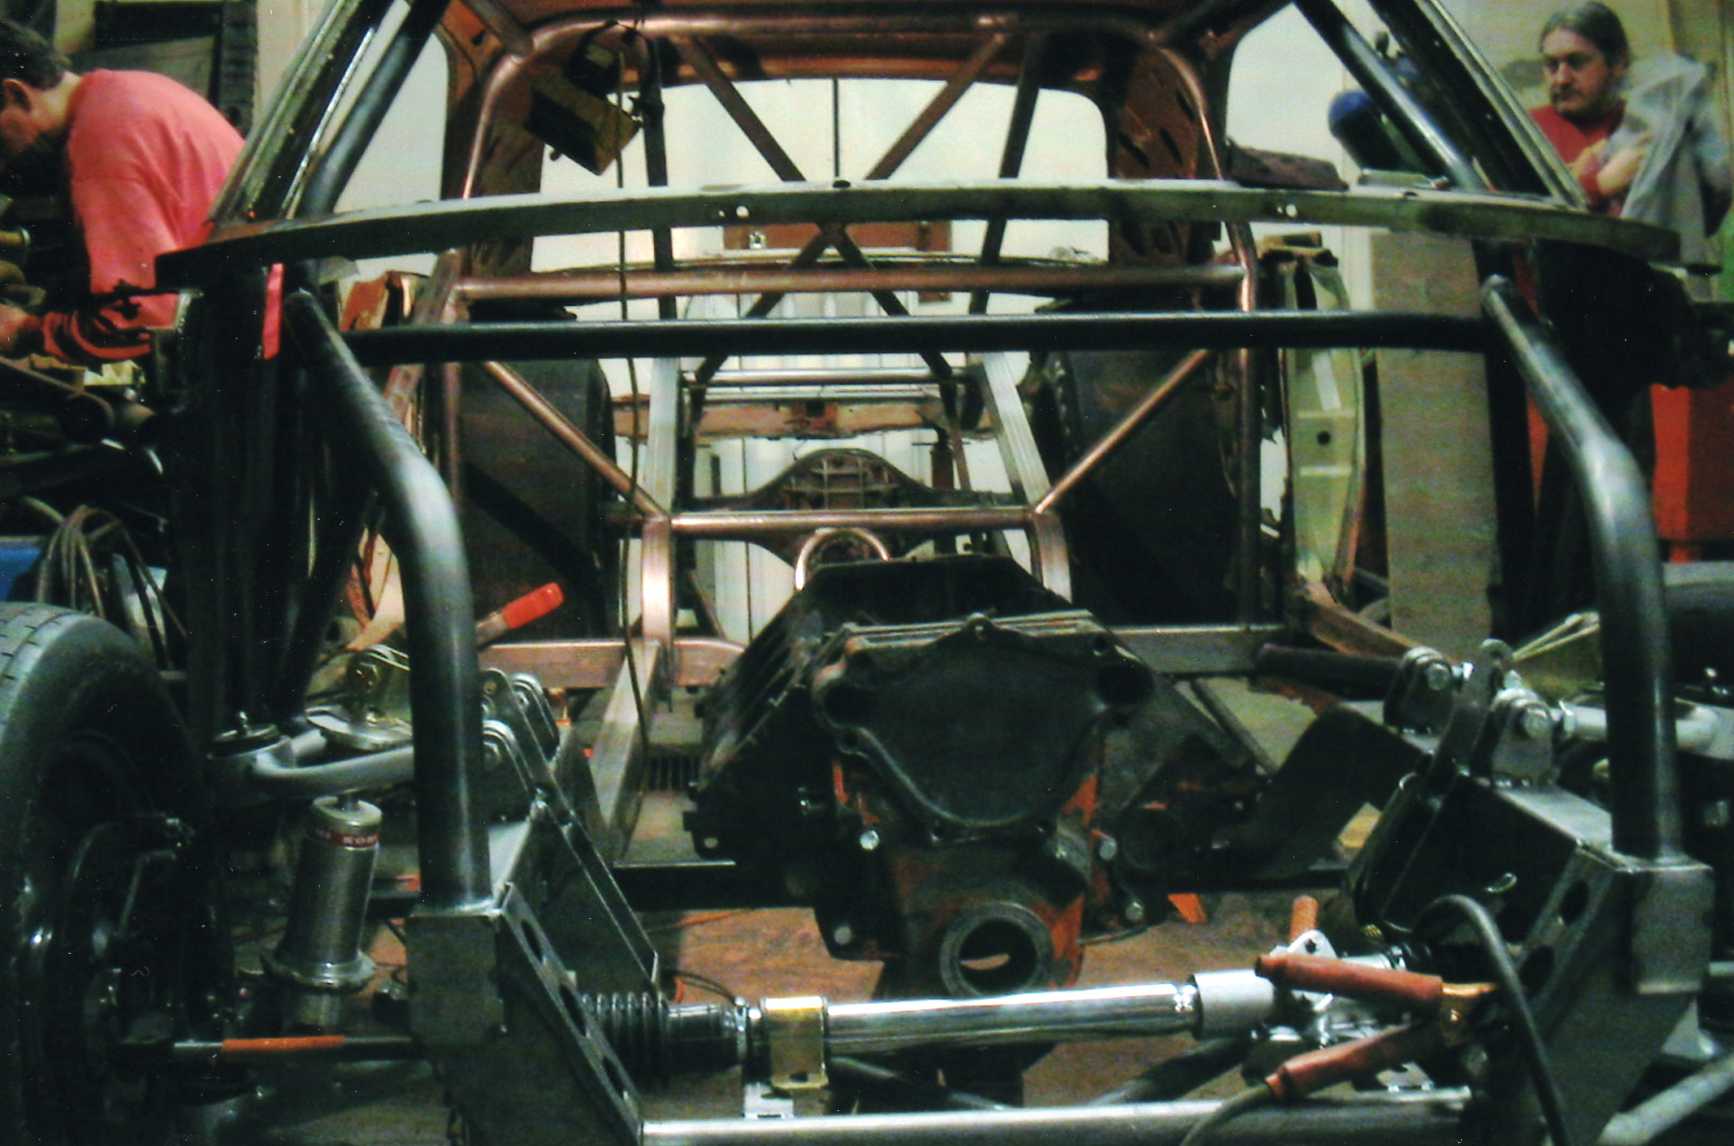 The car frame takes shape and shows the triangulation